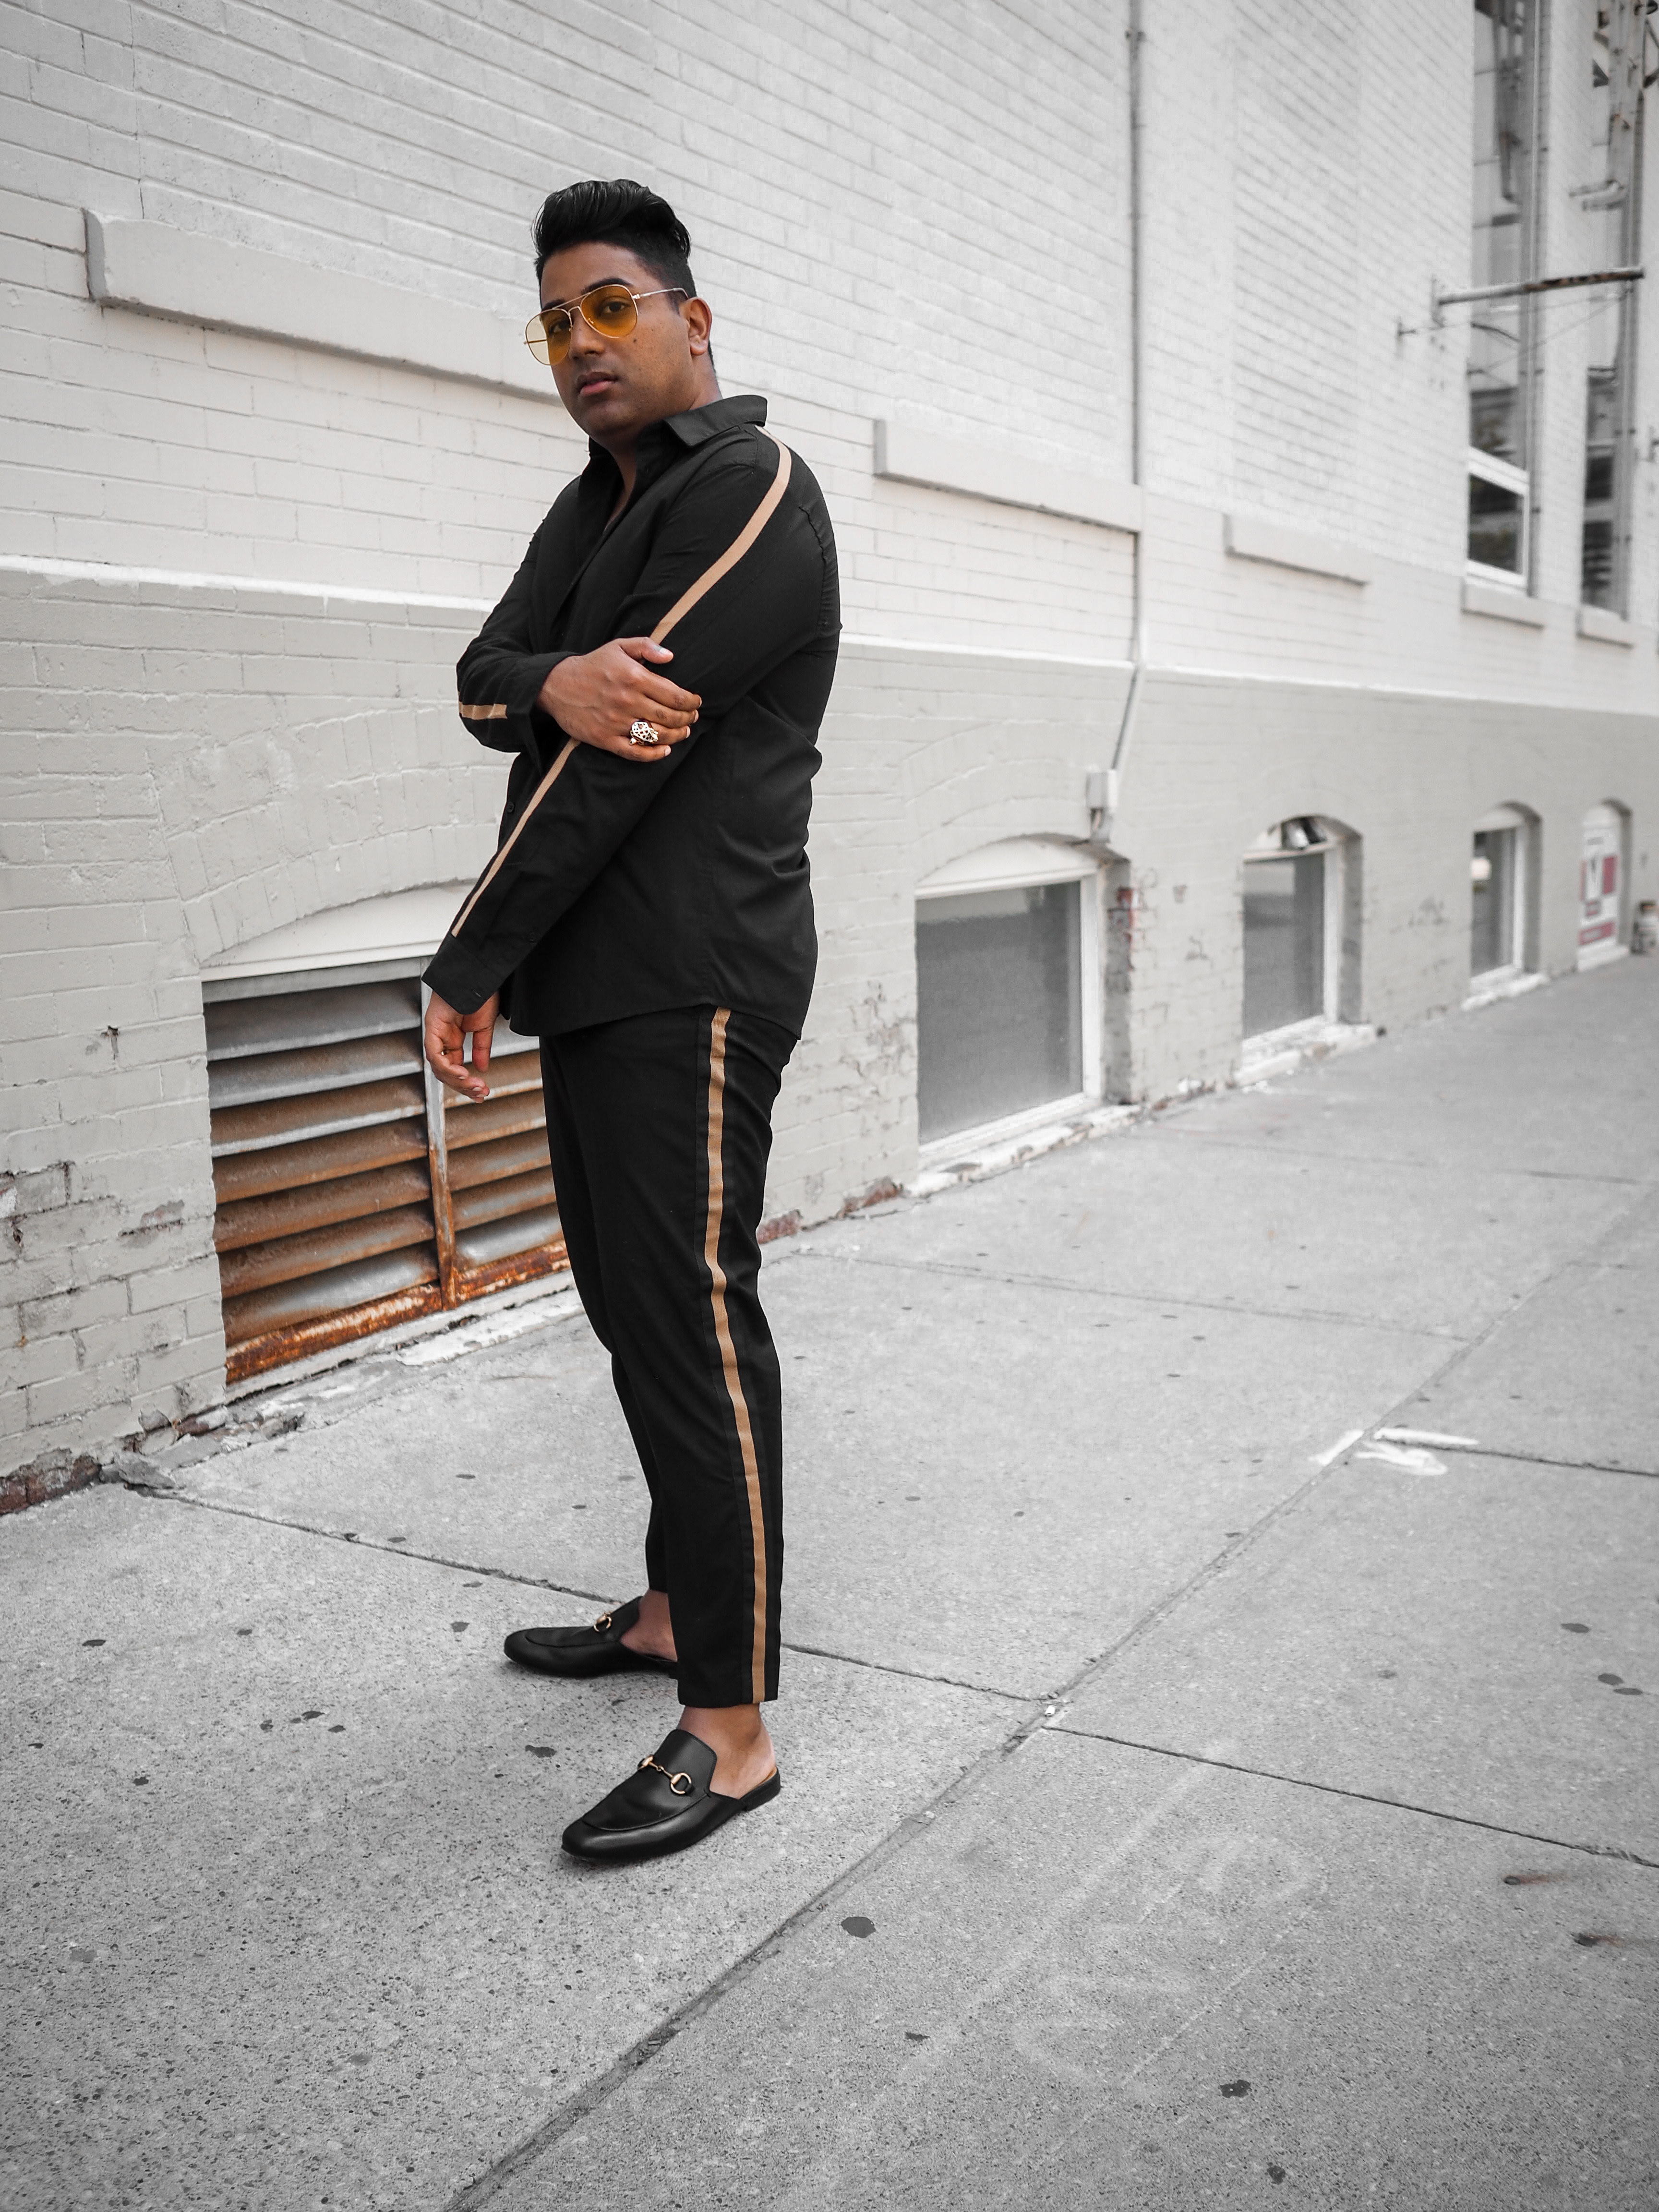 ENDOXIST | Gucci Princetown | Toronto Street Style | Say Goodbye to Summer | All Black Looks